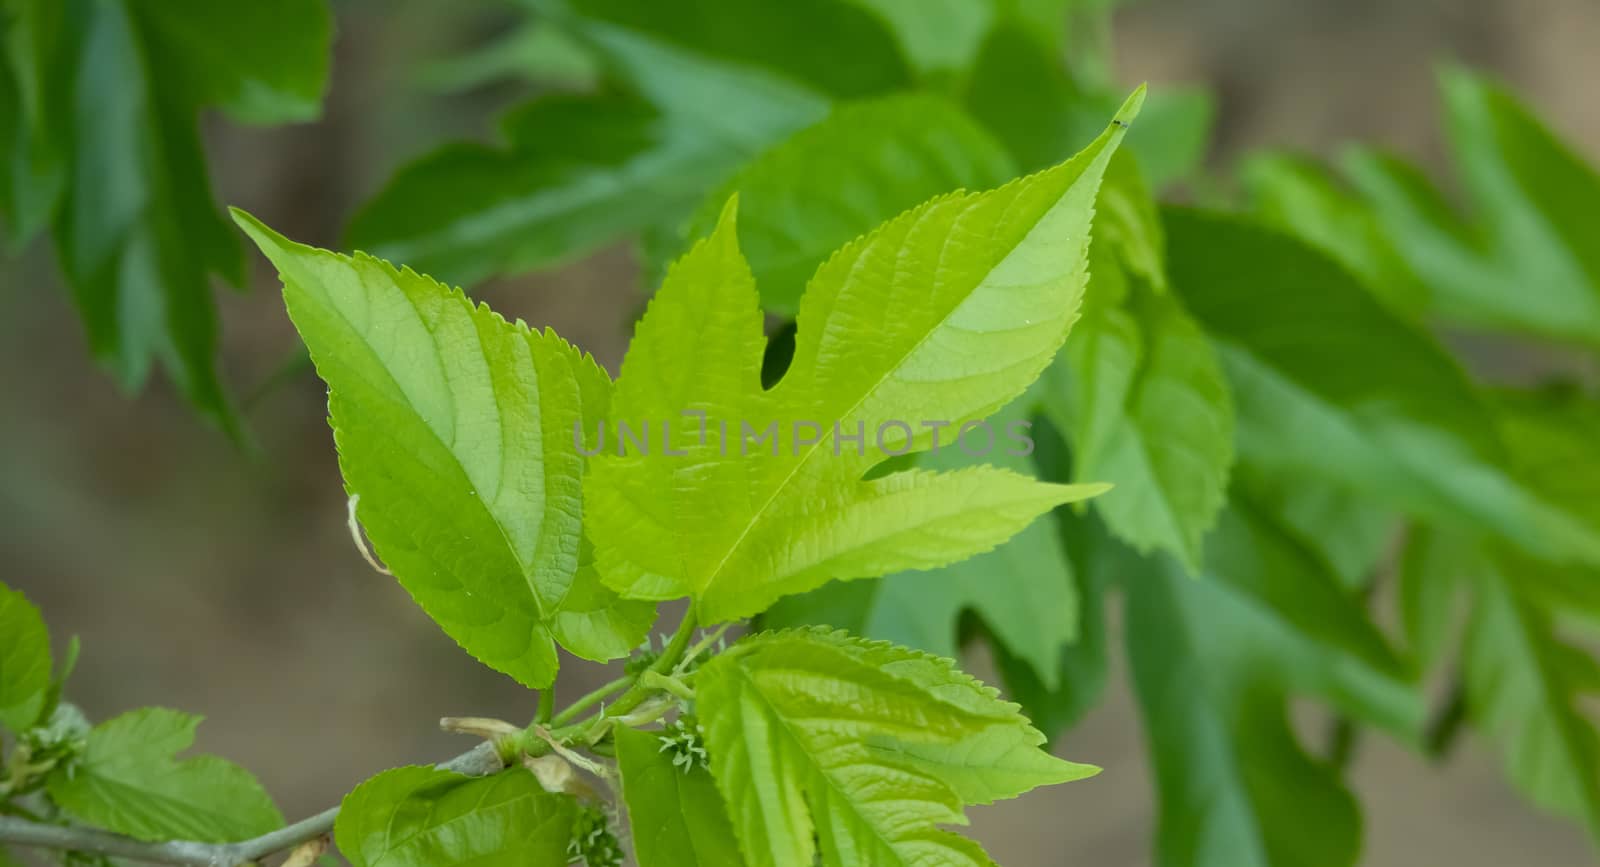 Leaf of Mulberry with Three Corners, It can be used as a texture pattern and background